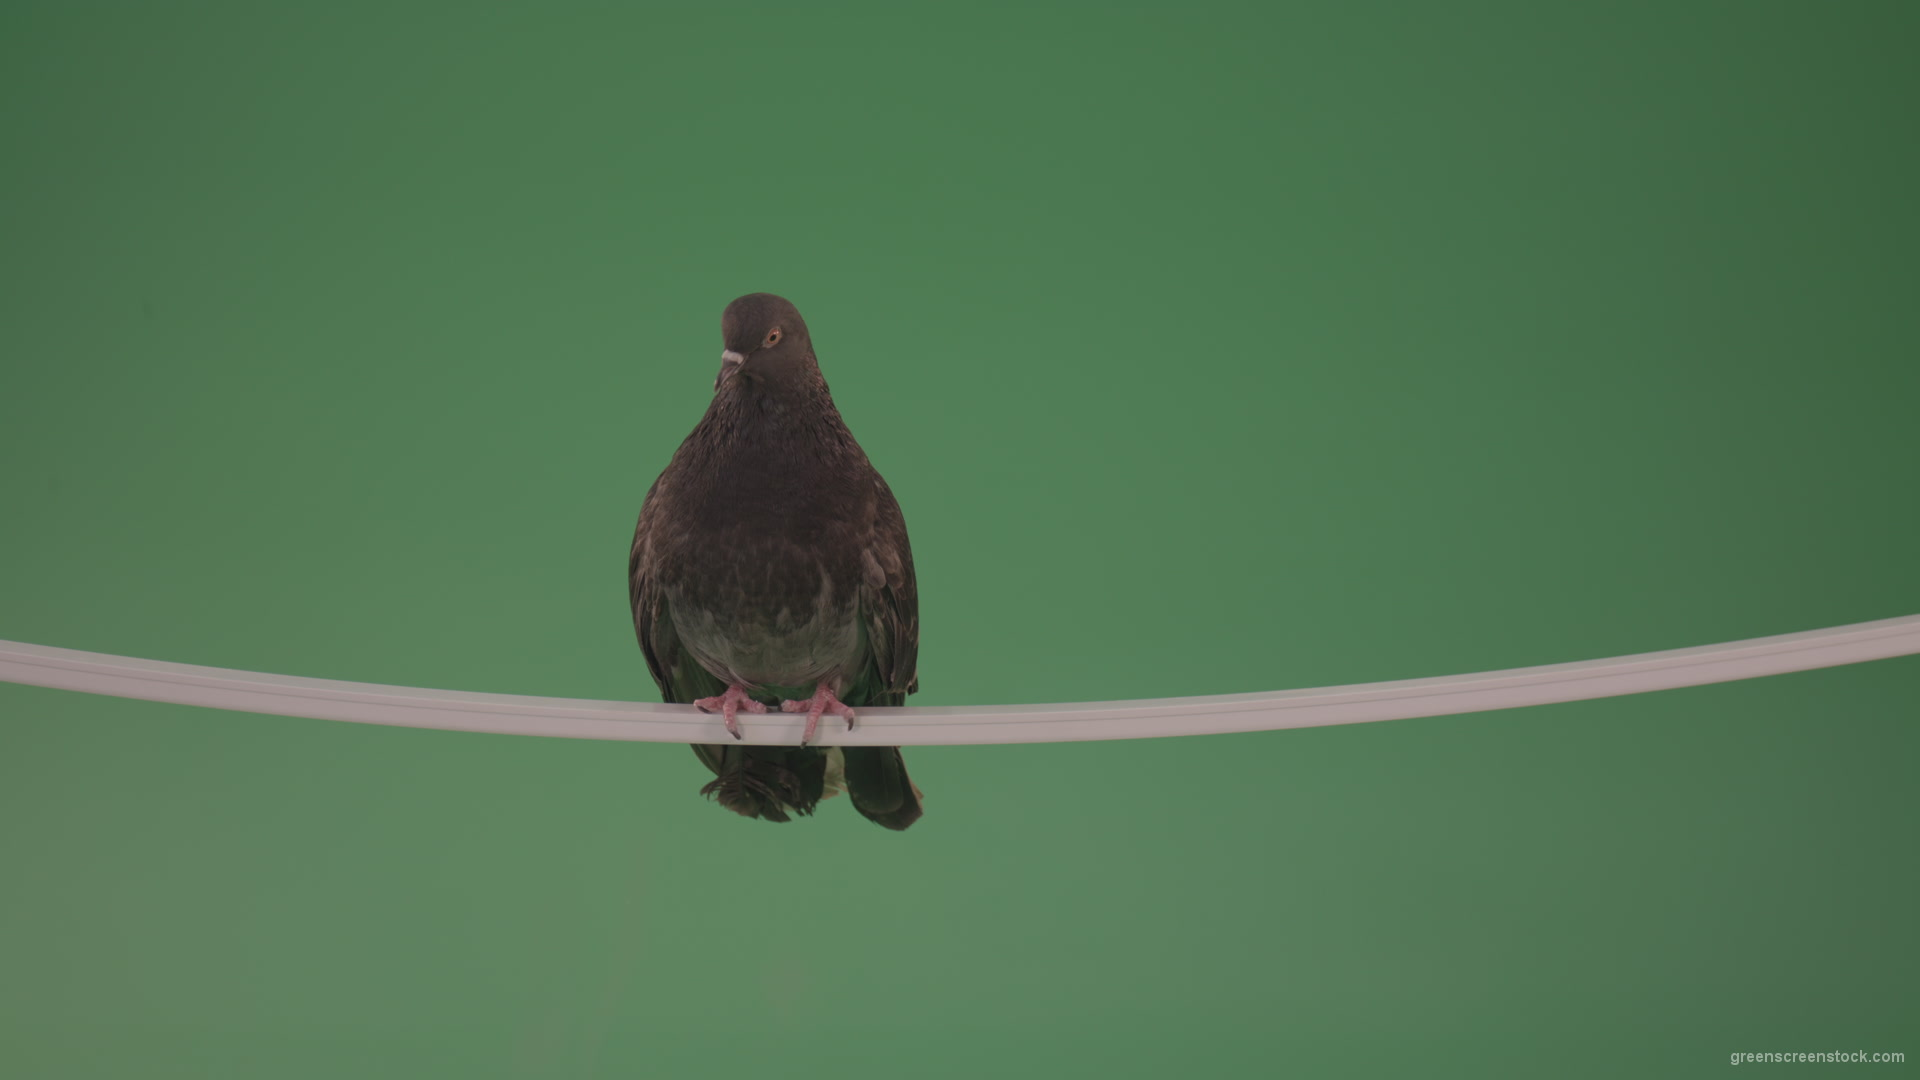 Sitting-bird-doves-on-a-pipe-in-a-big-city-isolated-on-chromakey-background_004 Green Screen Stock